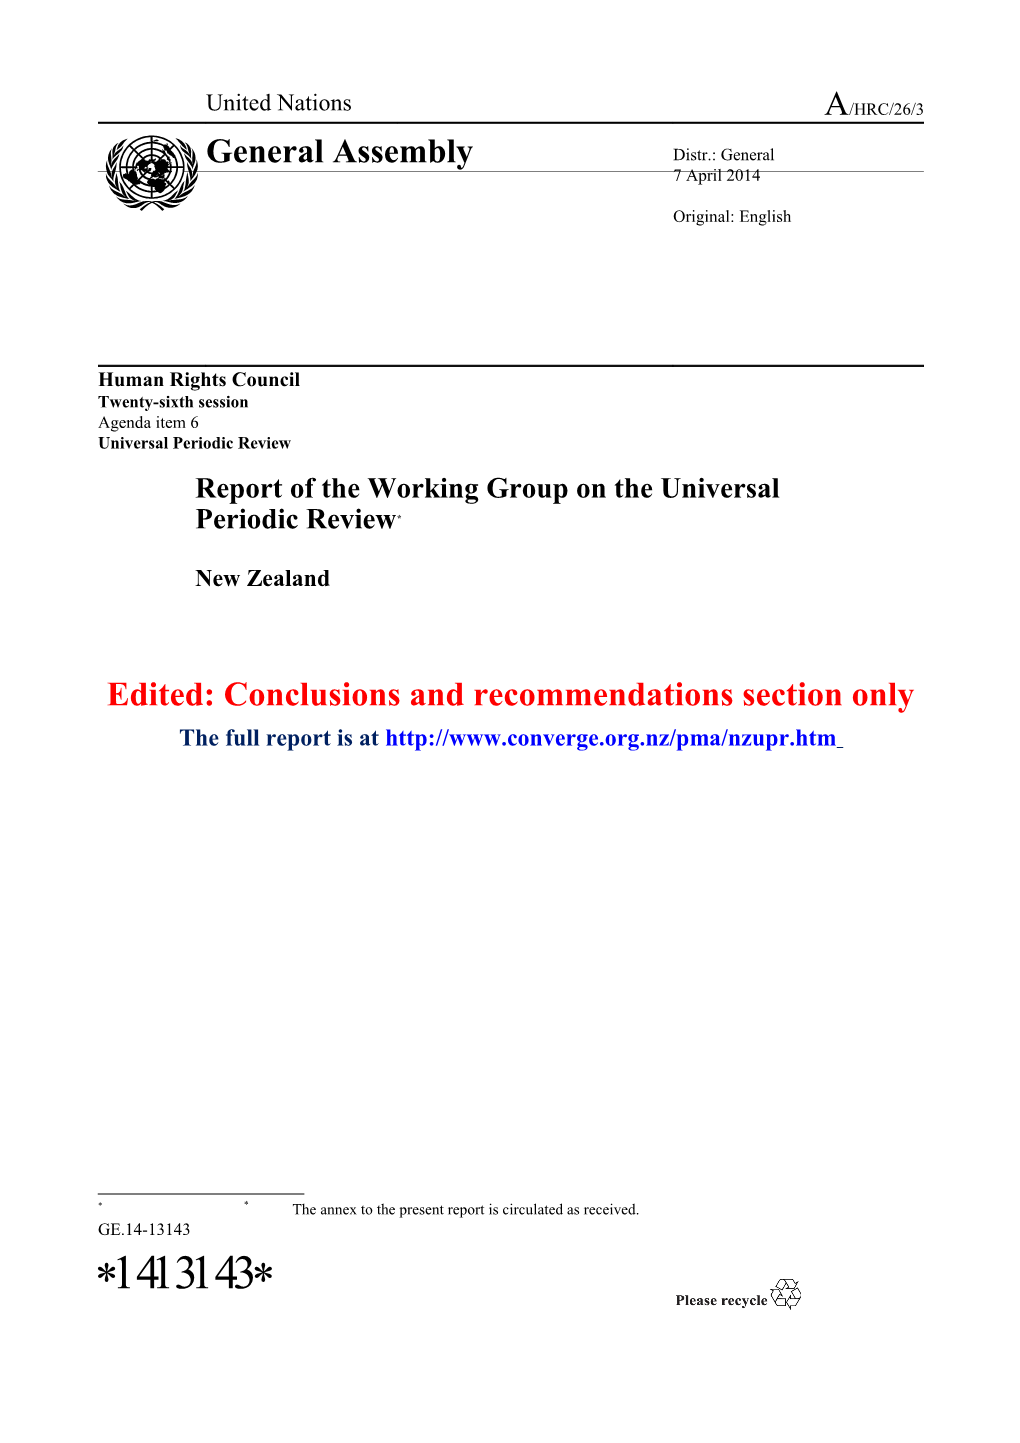 Report of the Working Group on the Universal Periodic Review, New Zealand in English